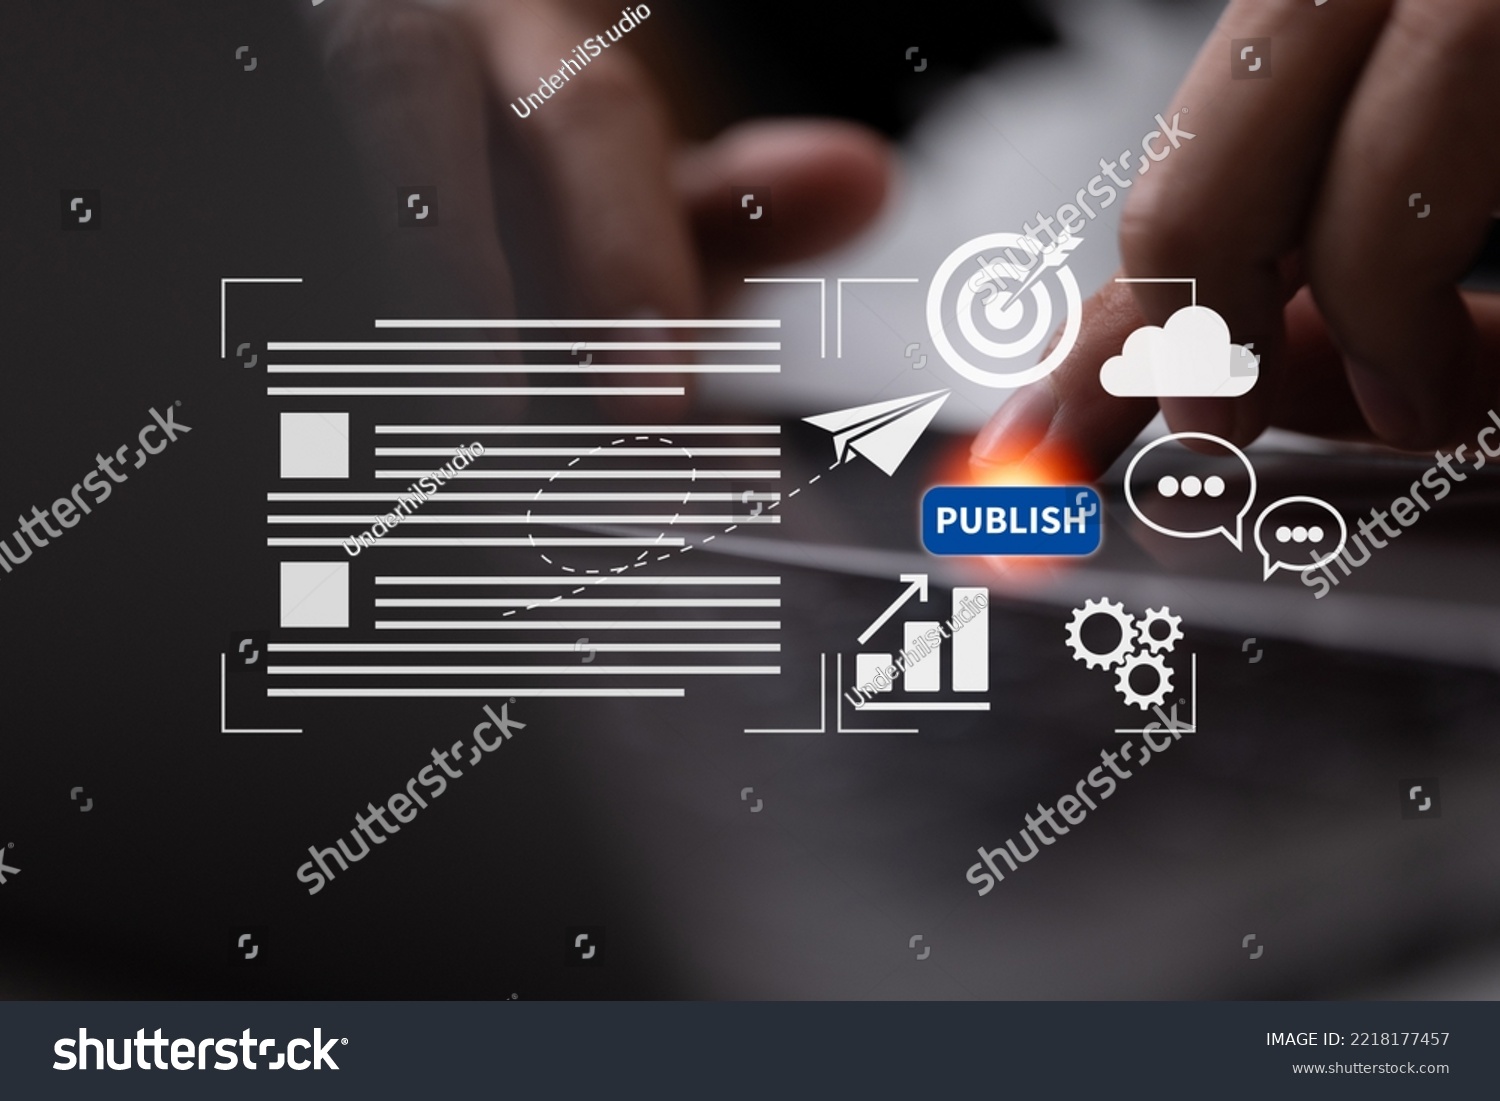 Create material for digital publications. Writing, posting, and uploading articles and other media to a website are all part of blog promotion. Organizing and publishing content on websites #2218177457